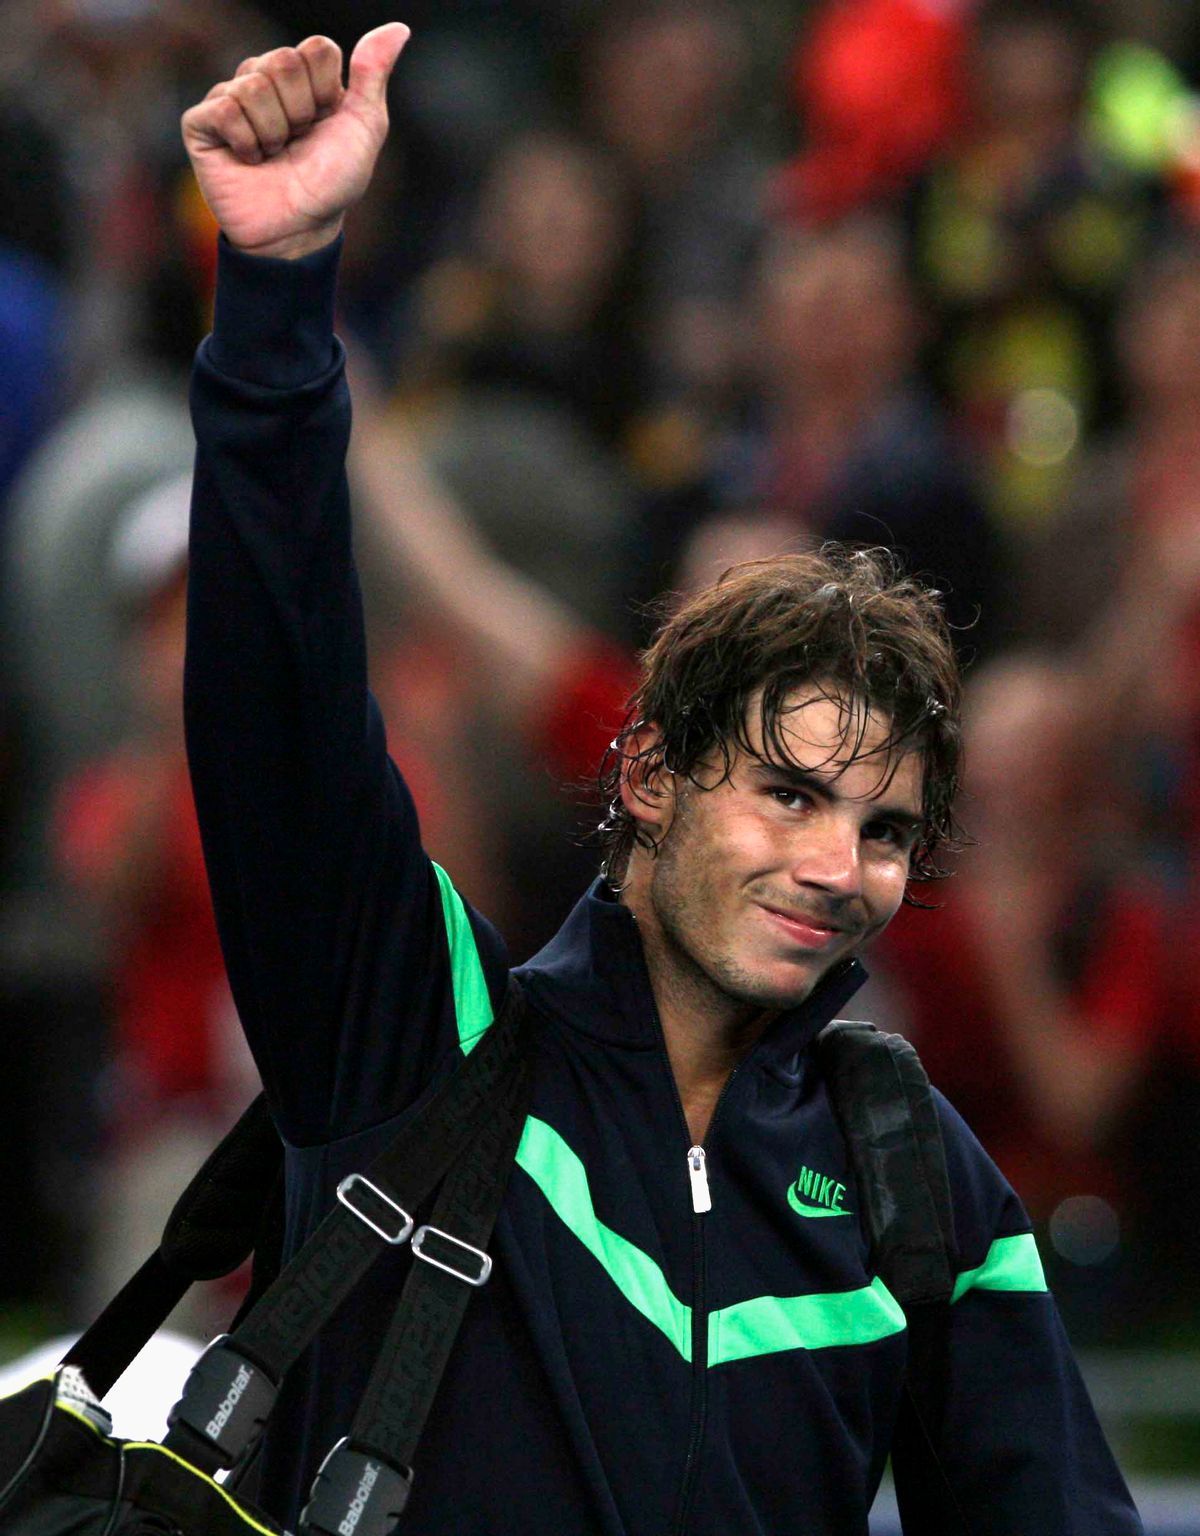 Spain's Rafael Nadal gives Chinese fans a thumbs up after winning over James Blake of the United States in the second round of the China Open tennis tournament in Beijing Thursday, Oct. 8, 2009. Nadal won 7-5, 6-7, 6-3 against Blake. (AP Photo/Elizabeth Dalziel)    (Elizabeth Dalziel)